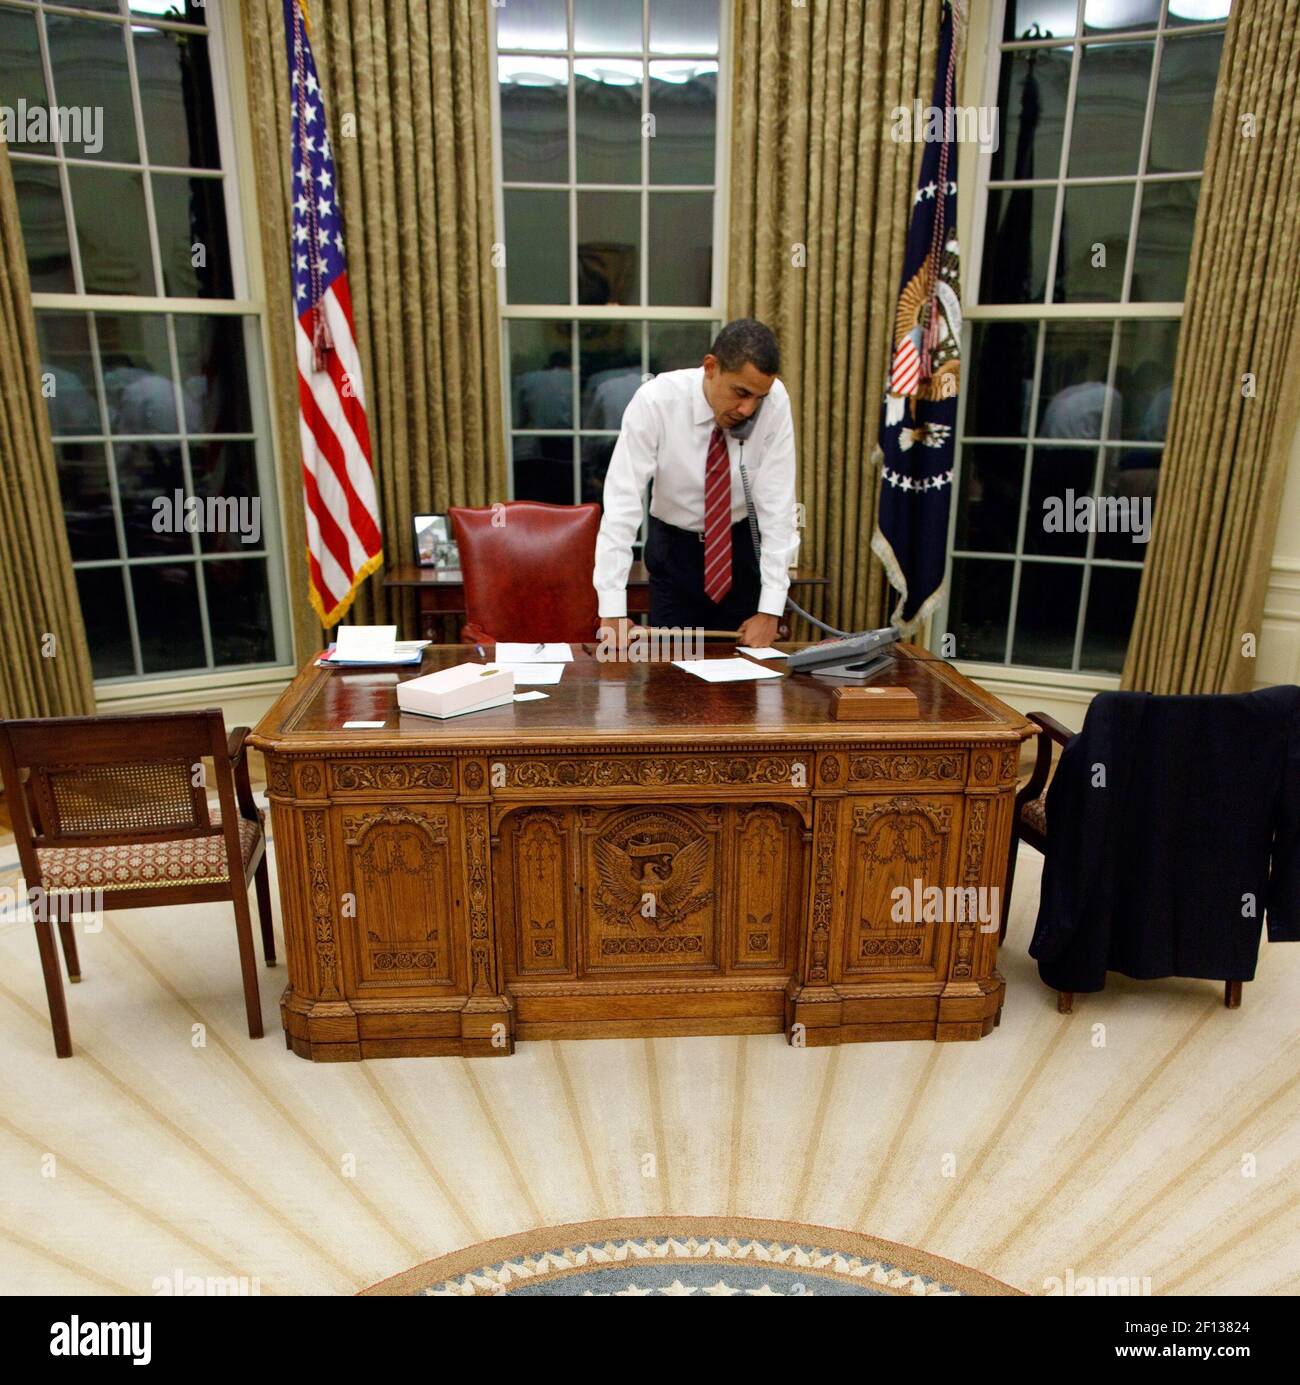 BARACK OBAMA ON PHONE w/ RUSSIAN PRESIDENT IN THE OVAL OFFICE 8X10 PHOTO AZ887 